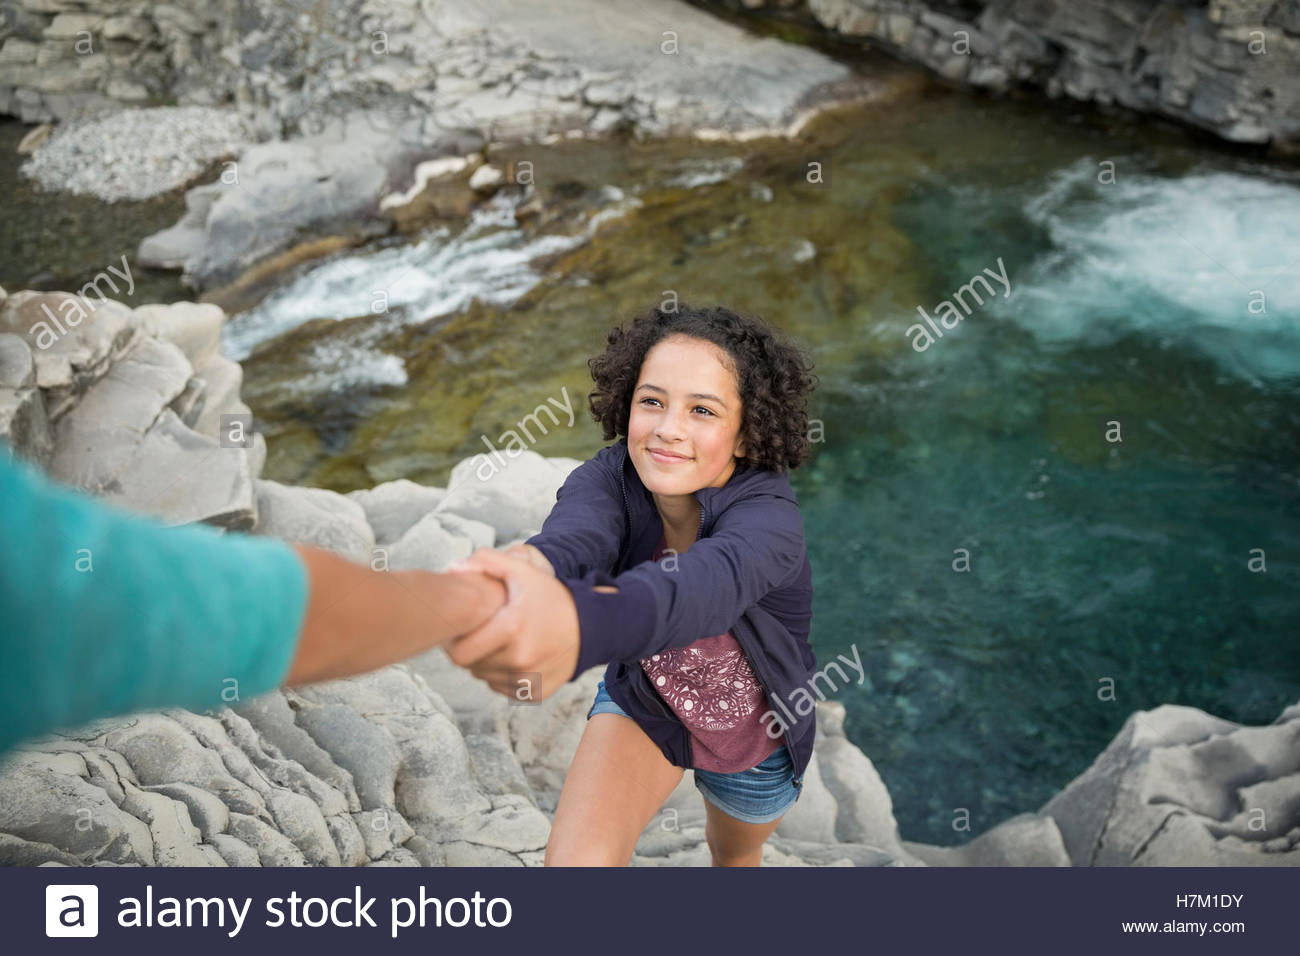 Girl climbing rocks being pulled up by helping hand Stock Photo